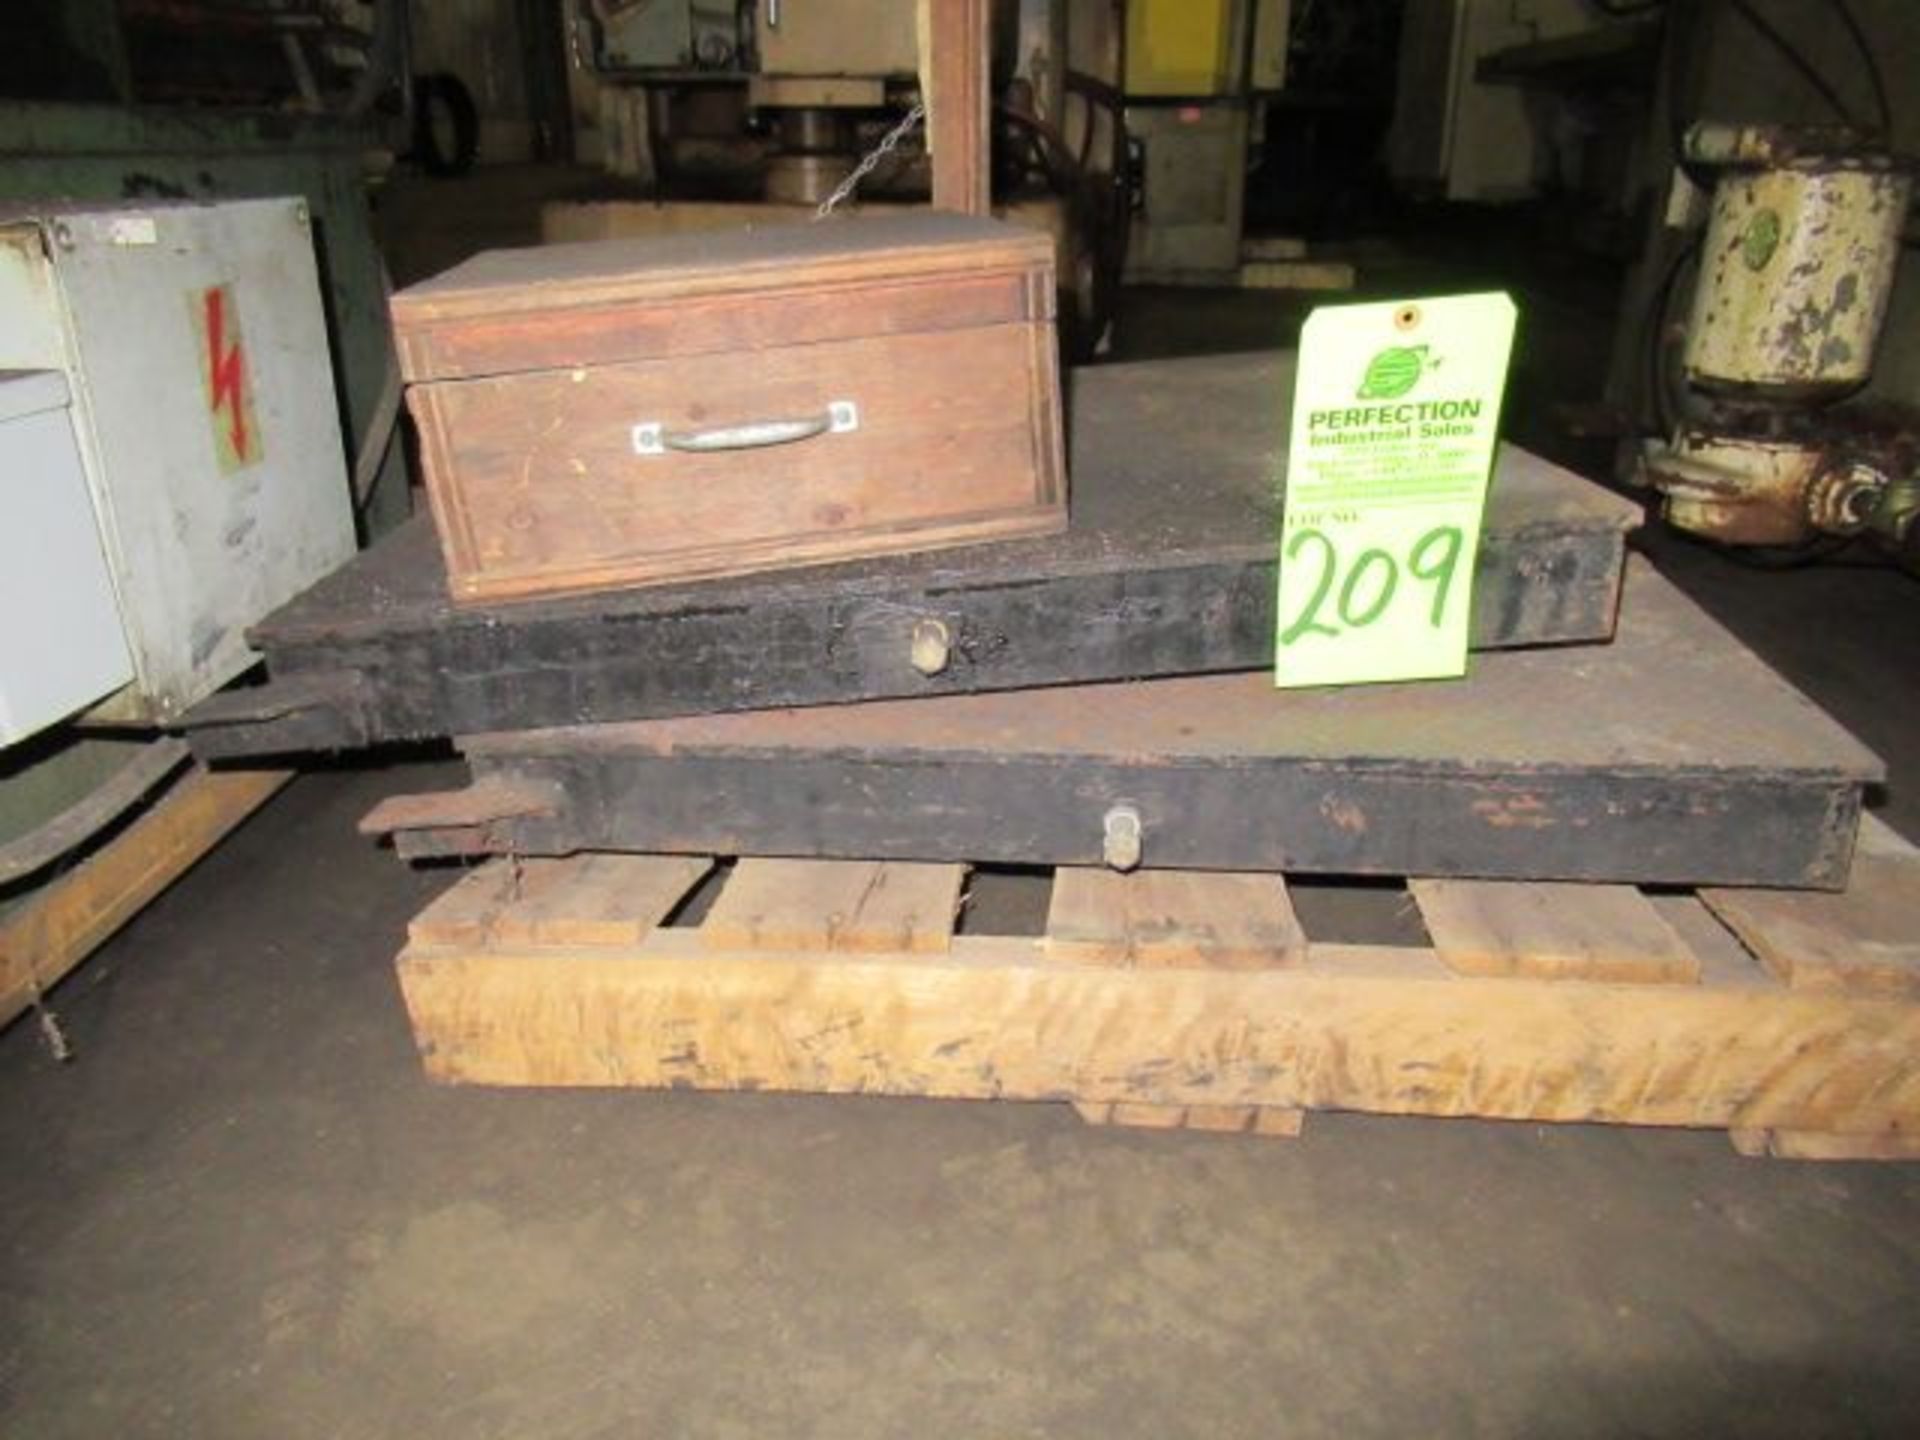 Lot. (2) 24 x 24" Platform Scales w/ Read Out ($50 Rigging Cost) - Image 3 of 4